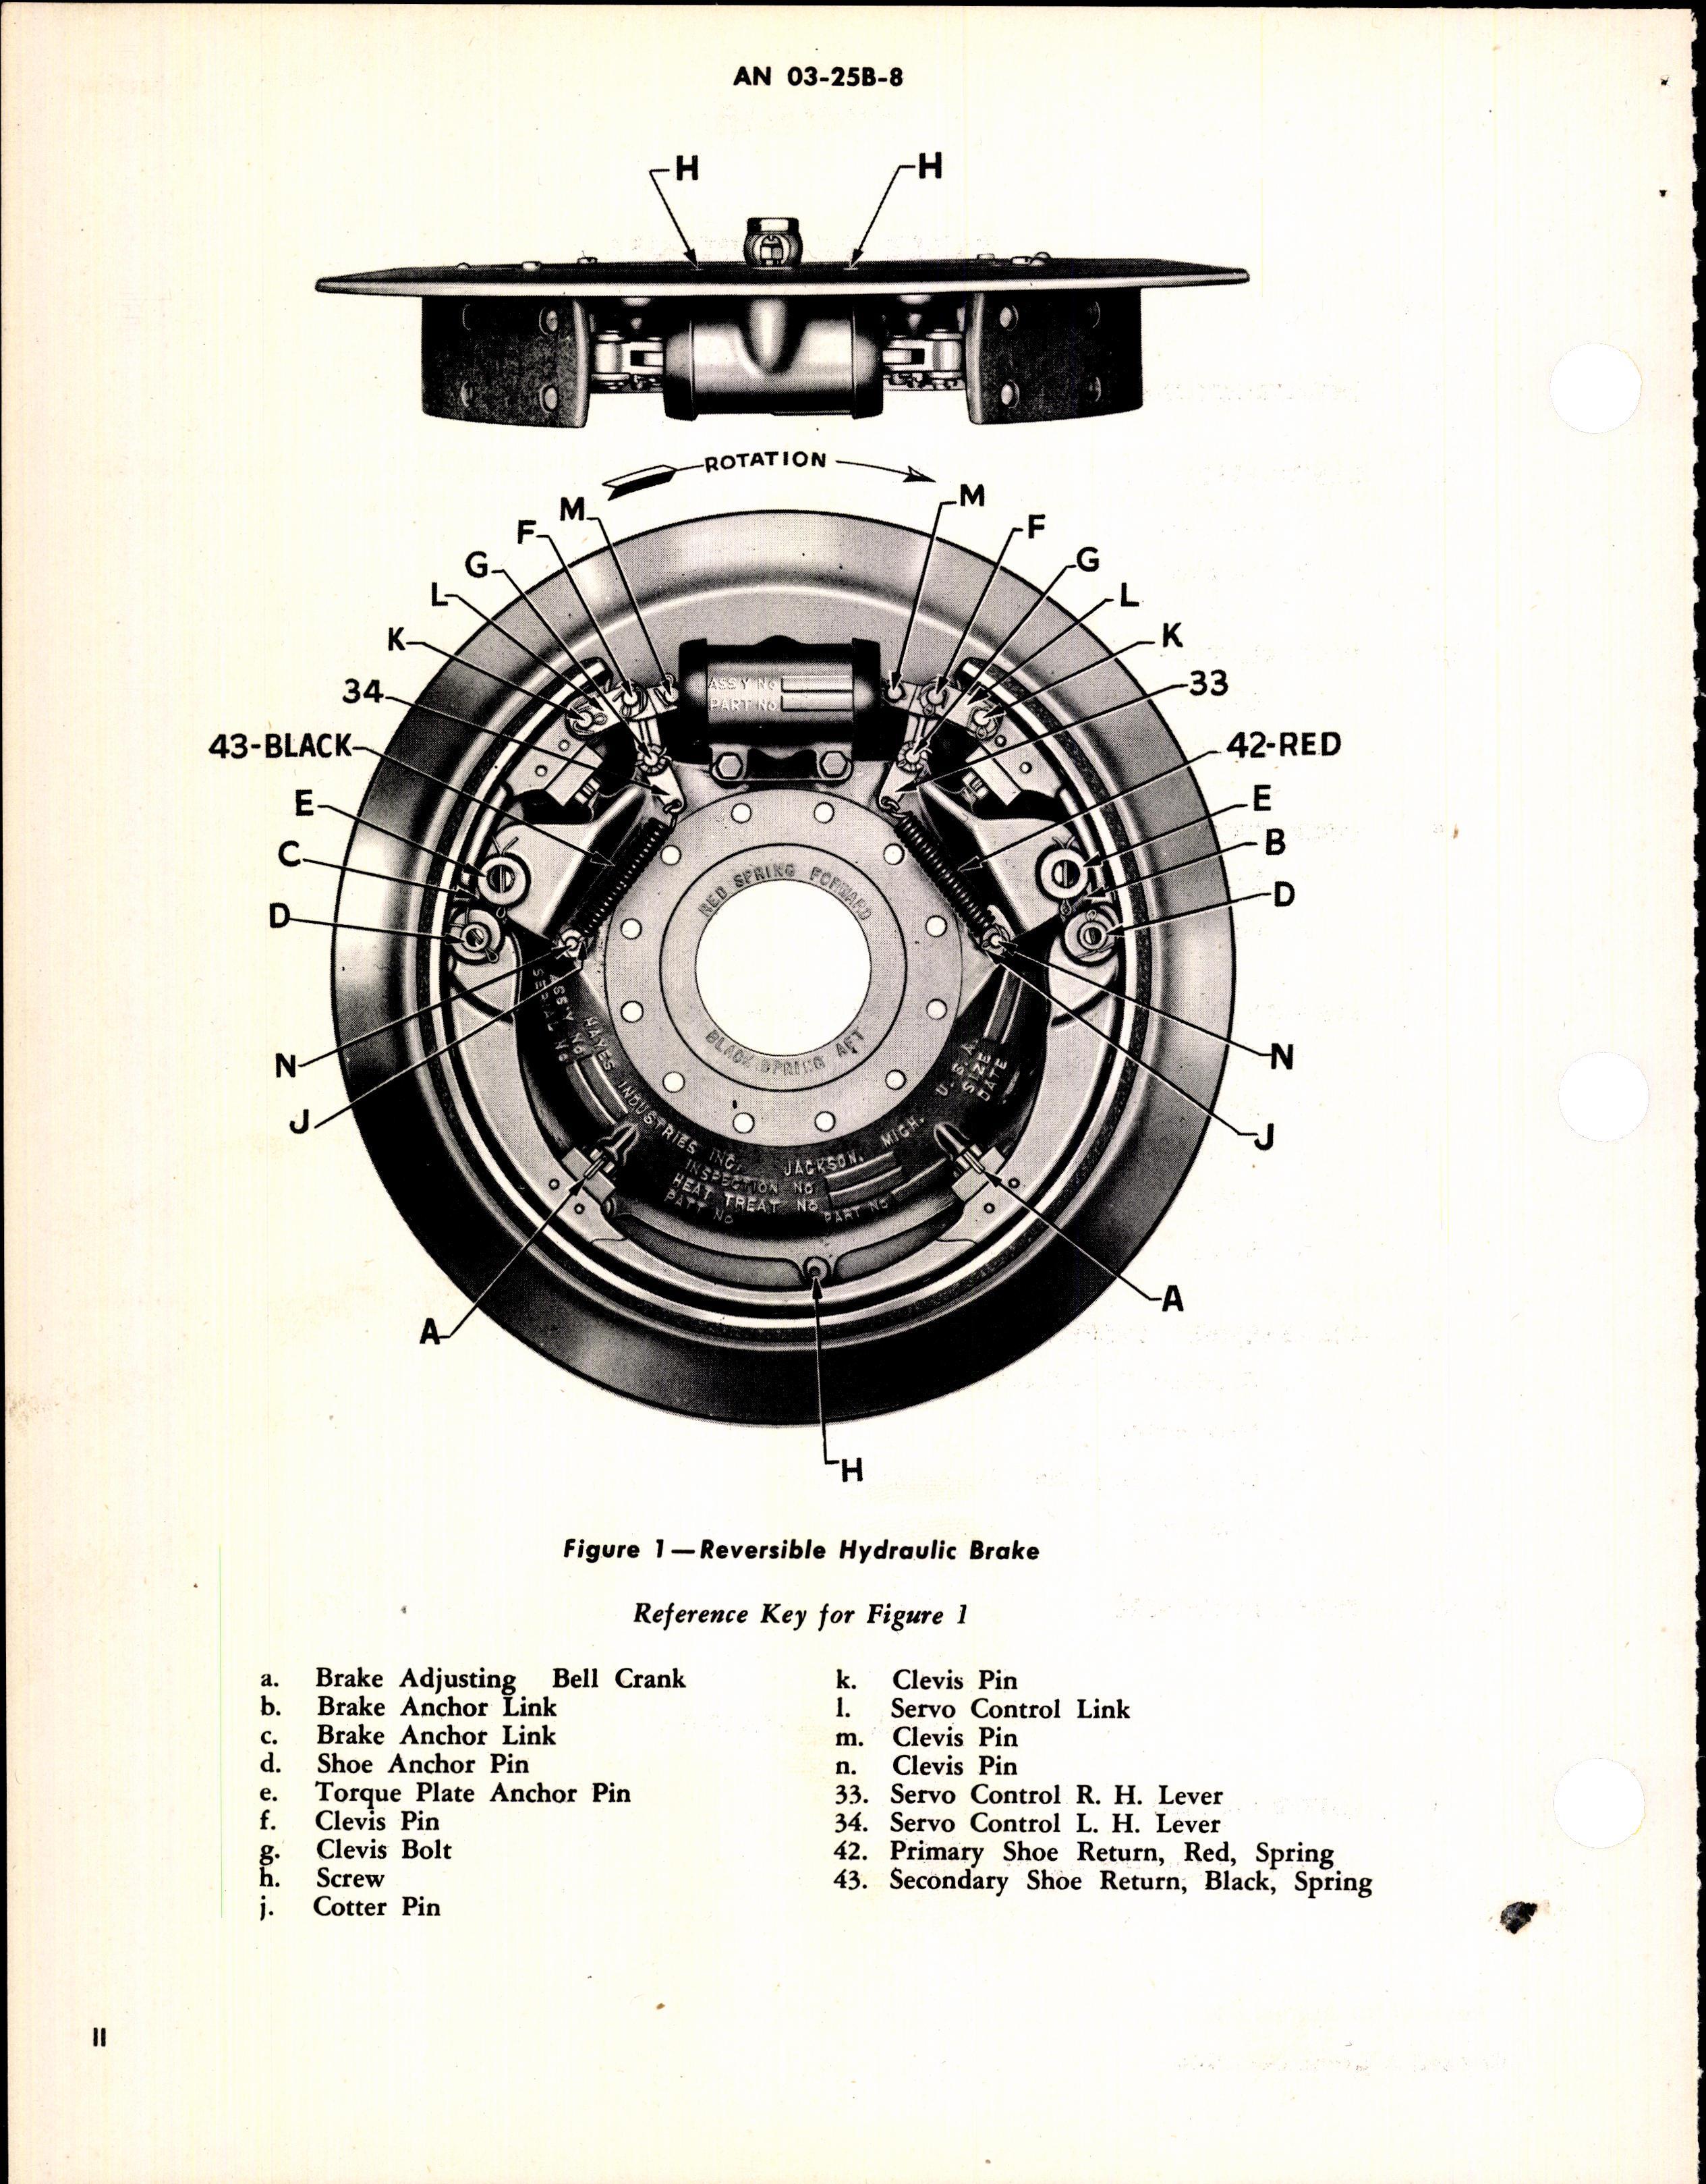 Sample page 4 from AirCorps Library document: Operation, Service, & Overhaul Instructions with Parts Catalog for Reversible Hydraulic Brakes